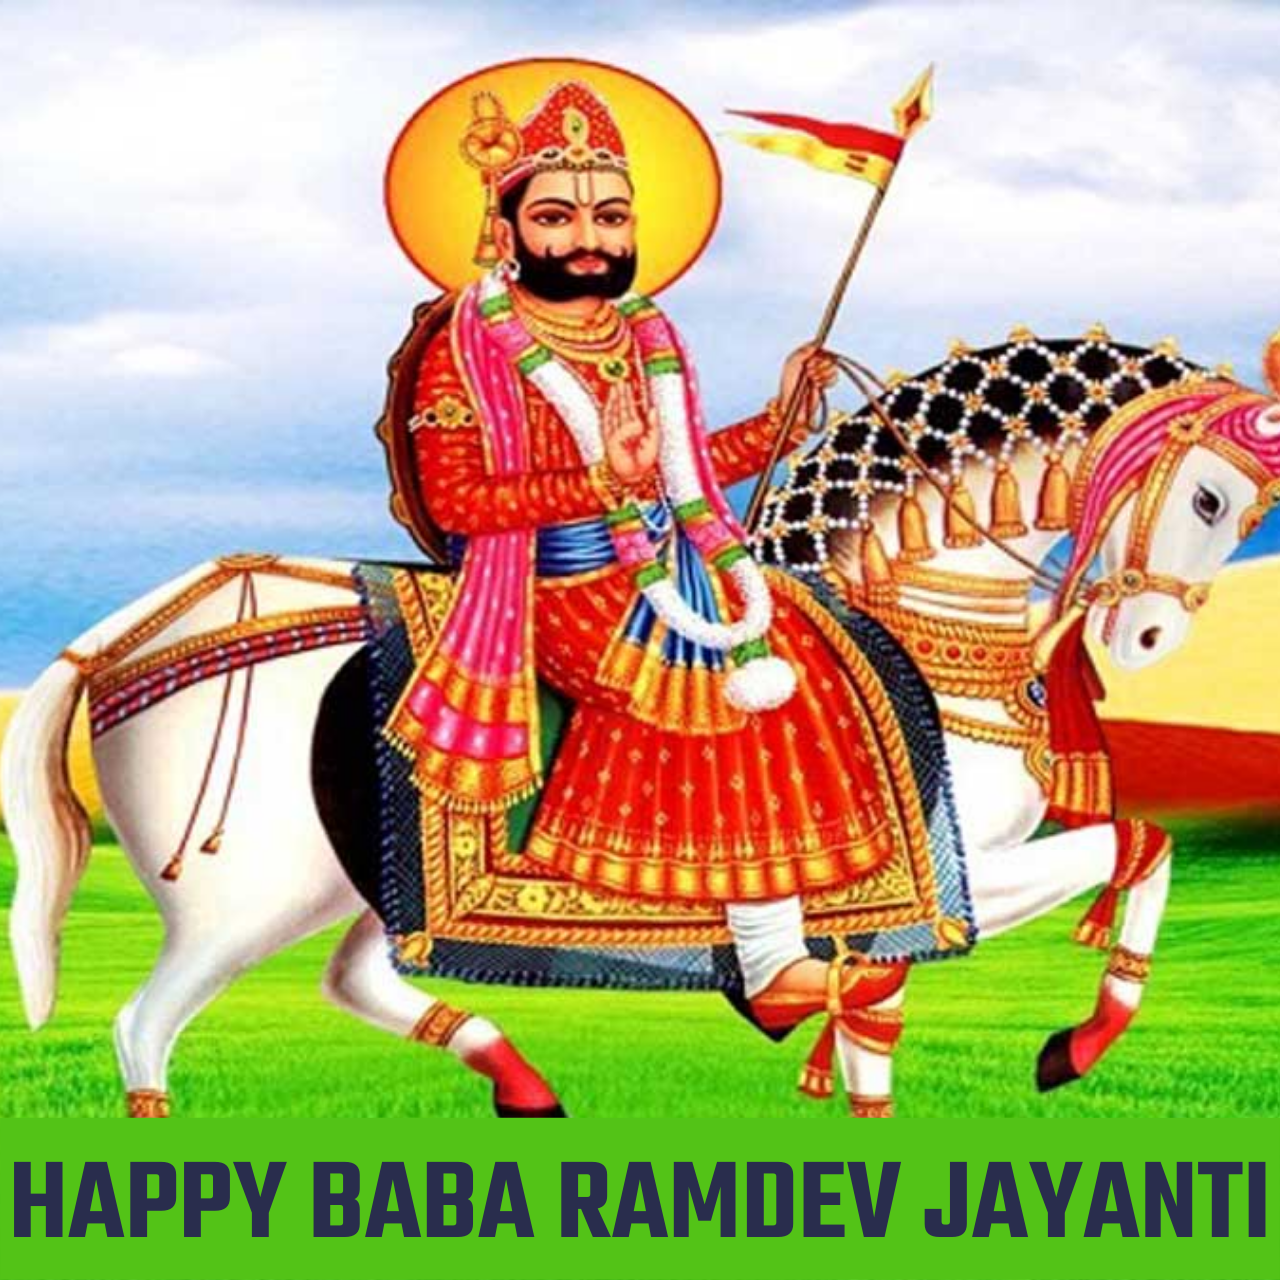 Happy Ramdev Jayanti 2021 Quotes, HD Images, Wishes, Status, Greetings, and Messages to Share